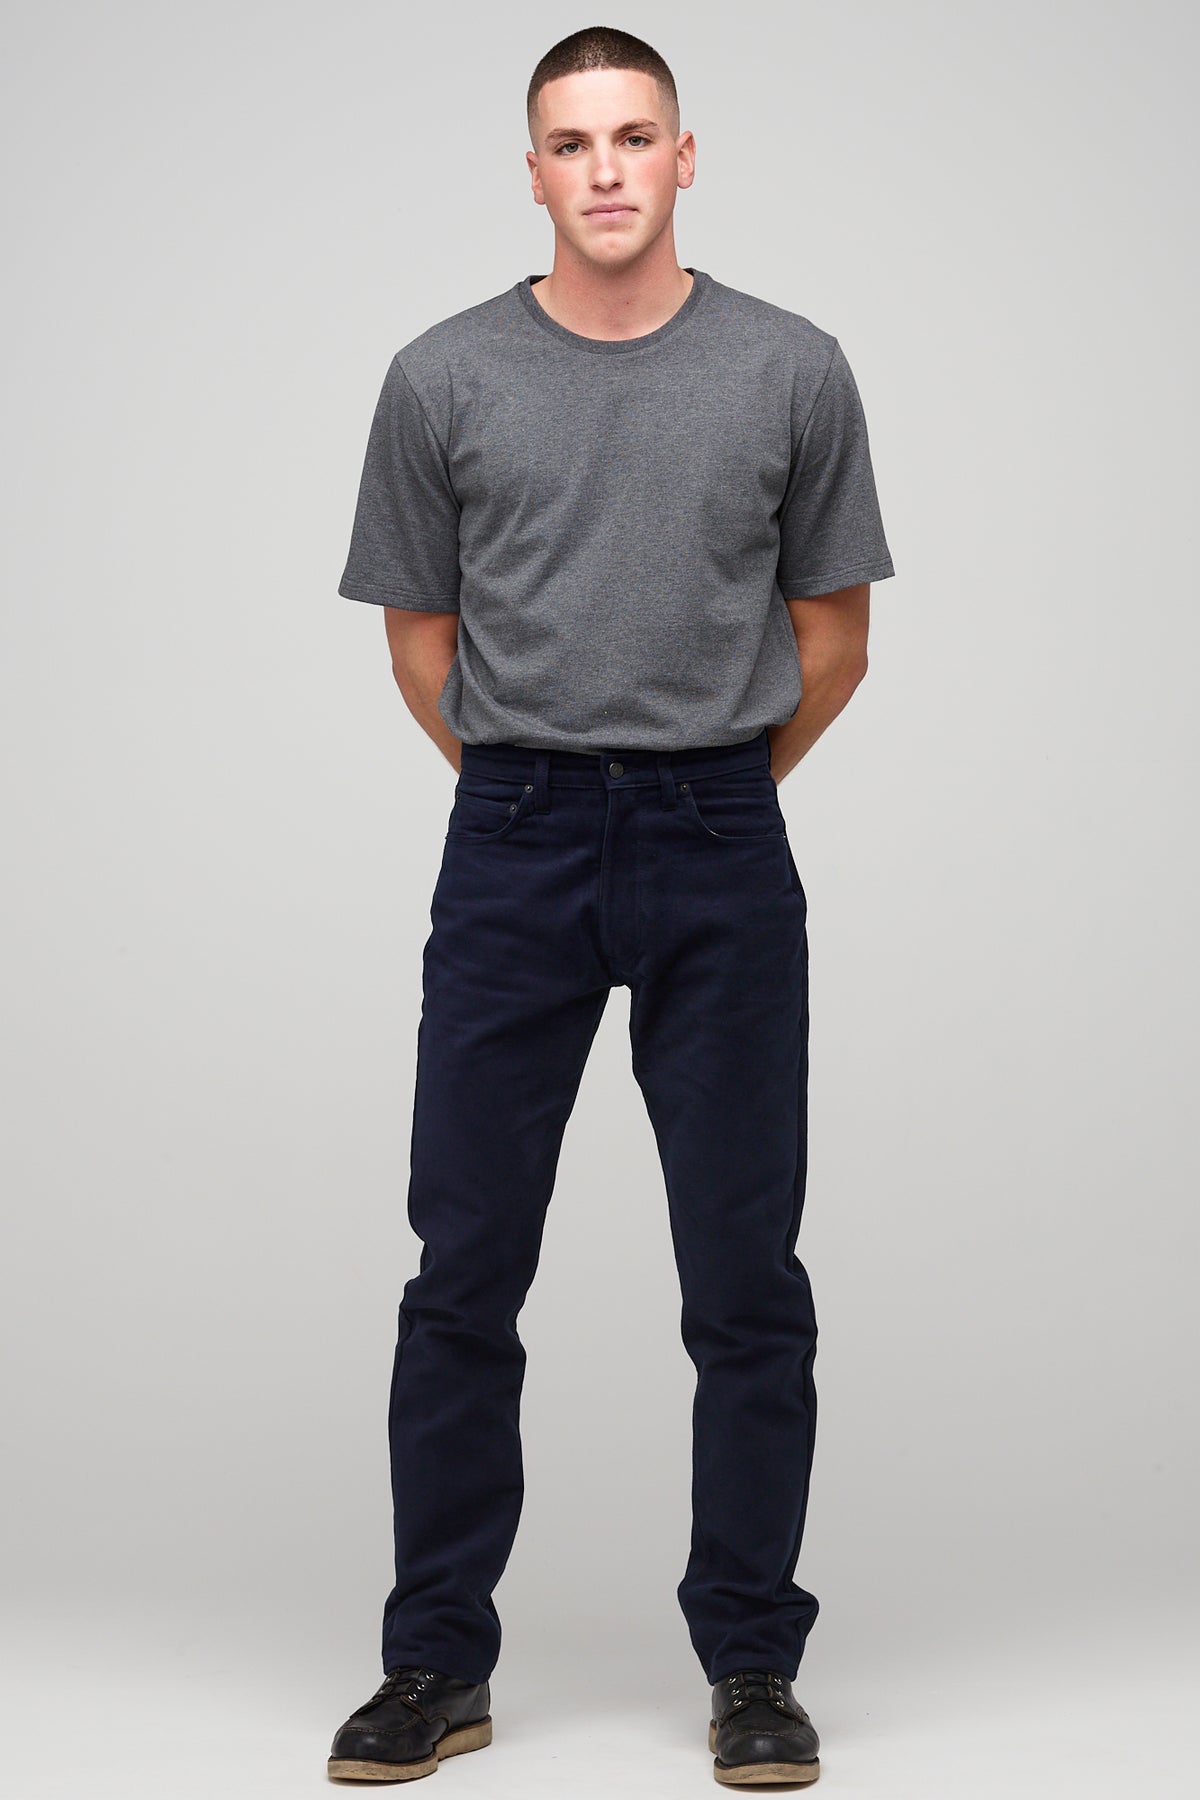 
            Brunette white male wearing charcoal short sleeve t-shirt styled with navy five pocket moleskin jeans